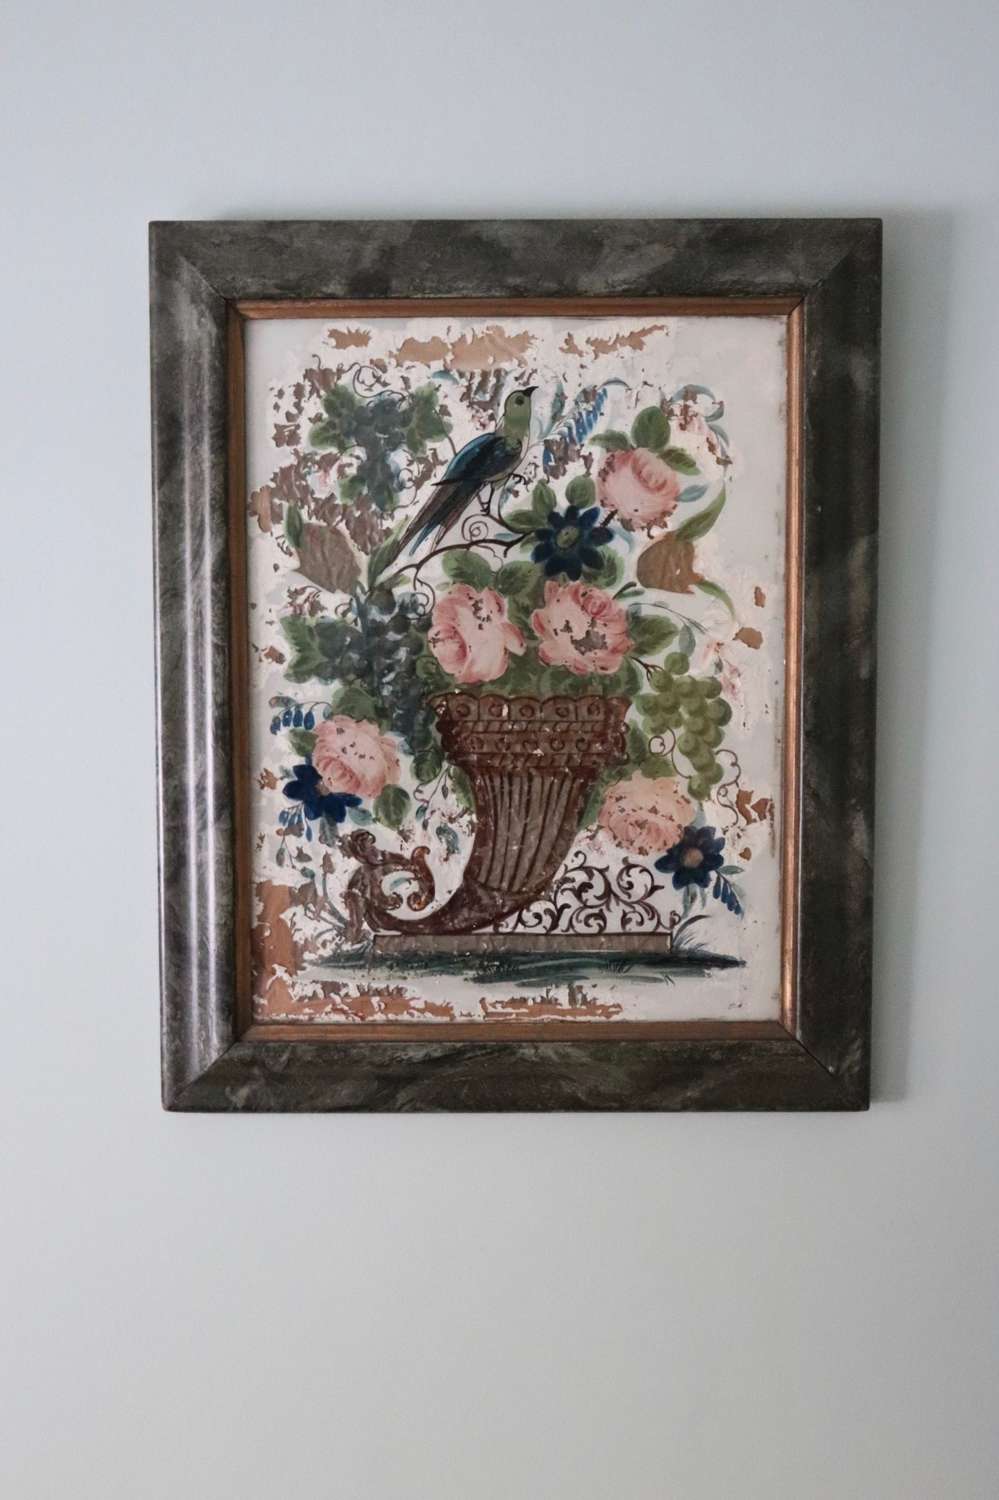 Pair of reverse glass painted pictures depicting birds and flowers